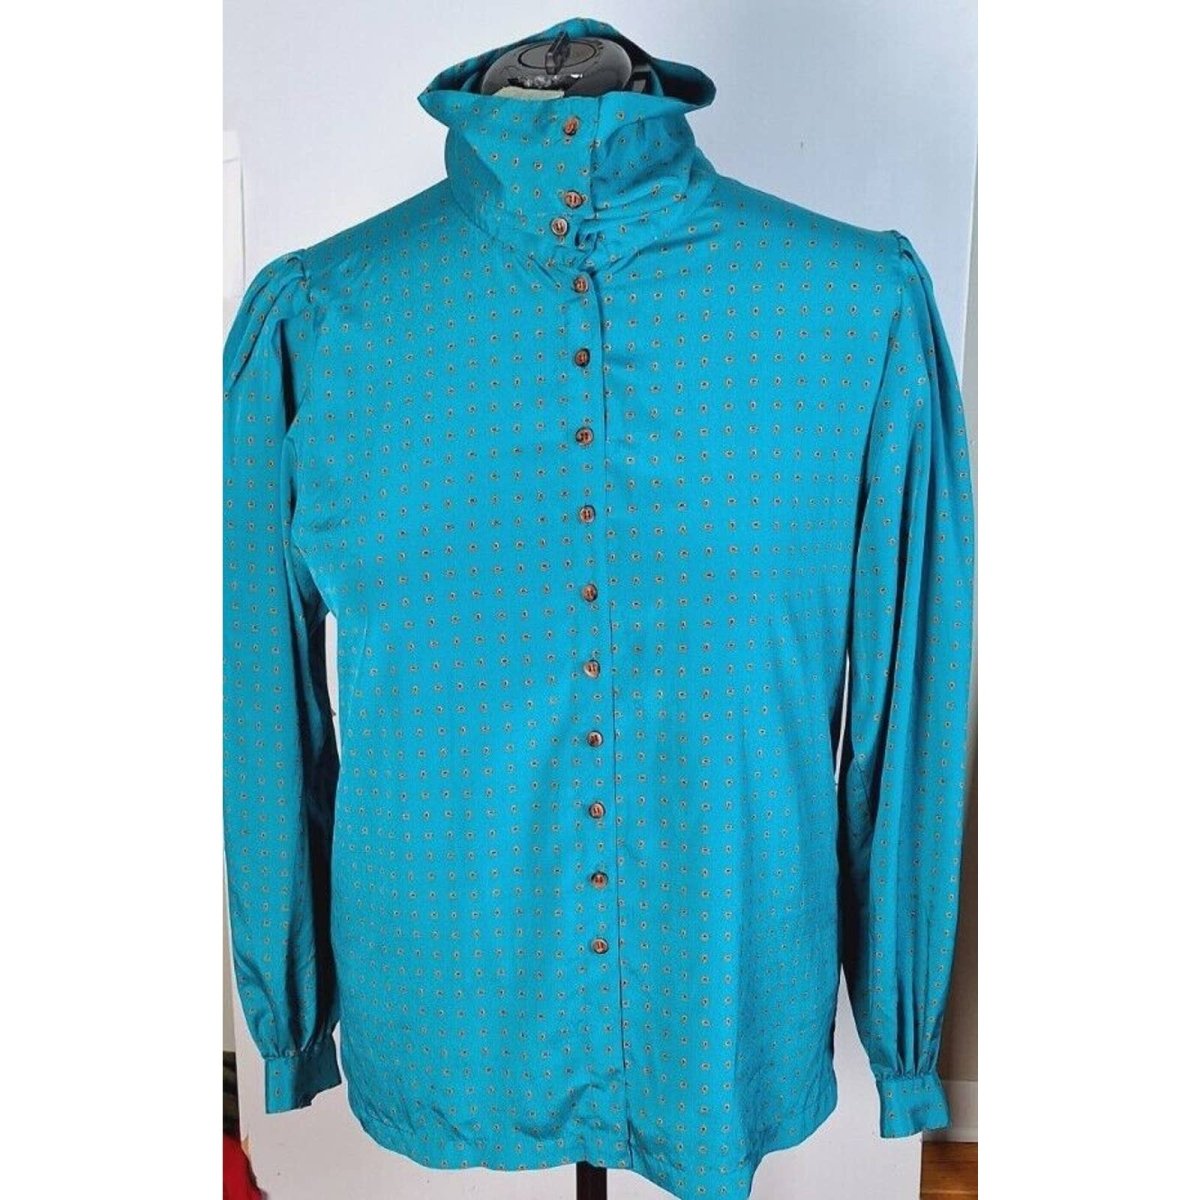 Vintage 80s Teal High Neck Balloon Sleeve Blouse Women's Size 14 L/XL - themallvintage The Mall Vintage